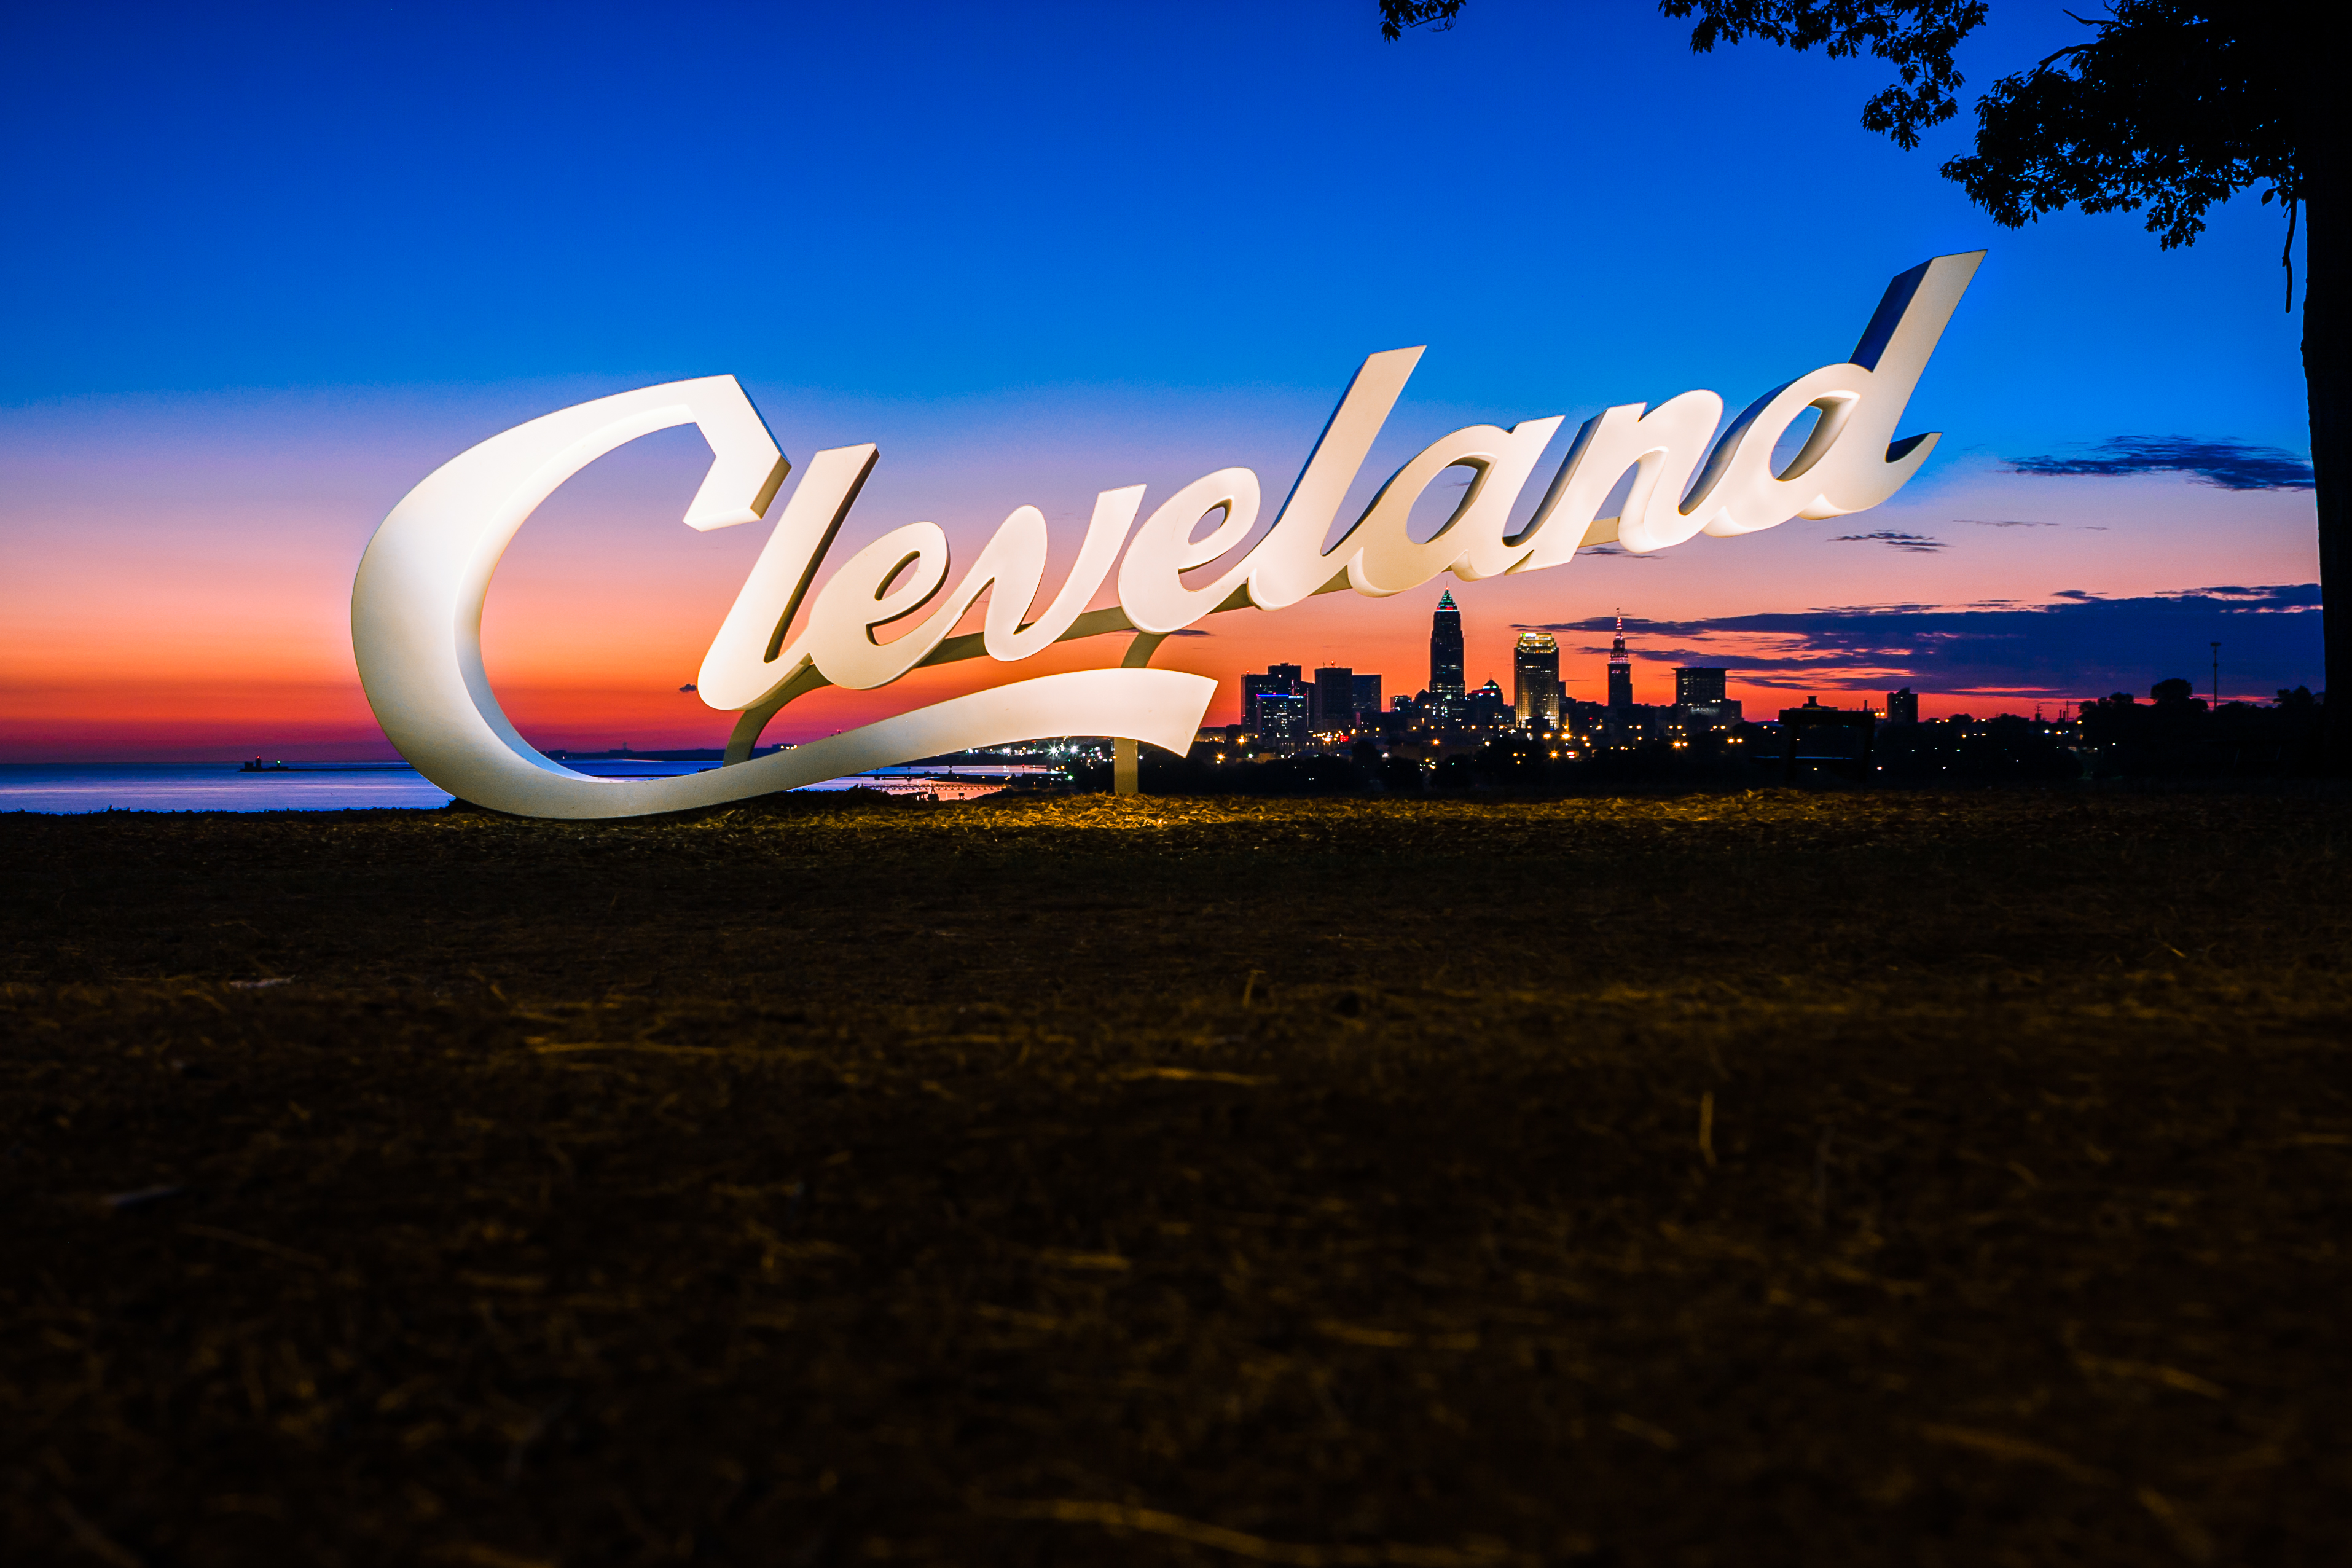  This photo is of the newly installed sign at Edgewater Park (The Upper Portion), right before sunrise. I love the colors during these twilight hours! This sign was installed shortly after the Cleveland Cavs won the championship! 